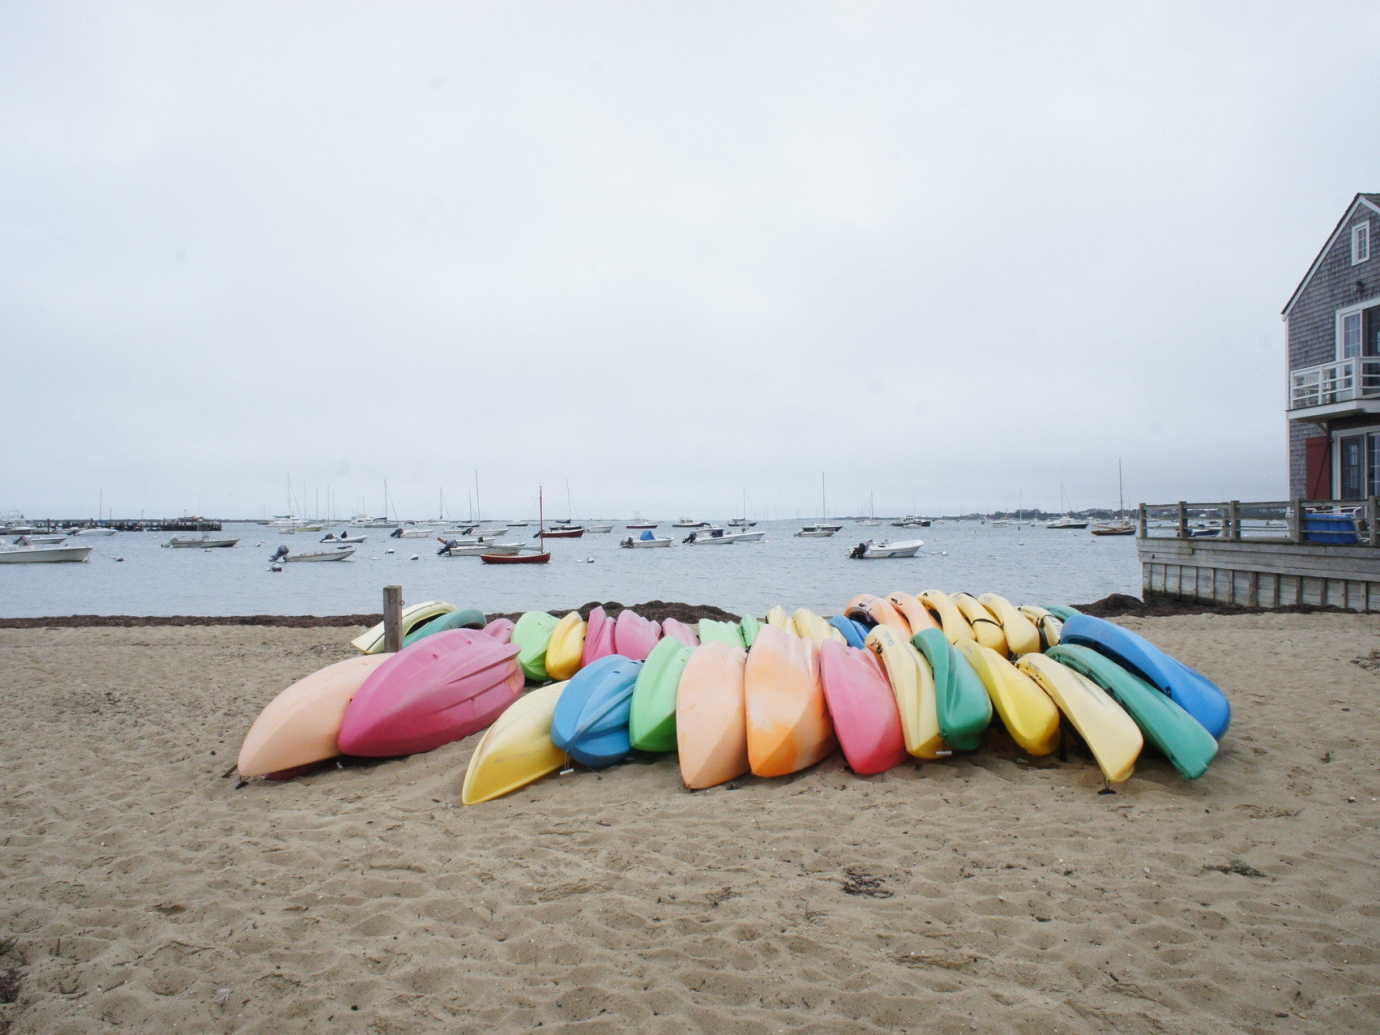 Canoes of assorted colors stacked on one another on a bay beach on a dreary day in Nantucket